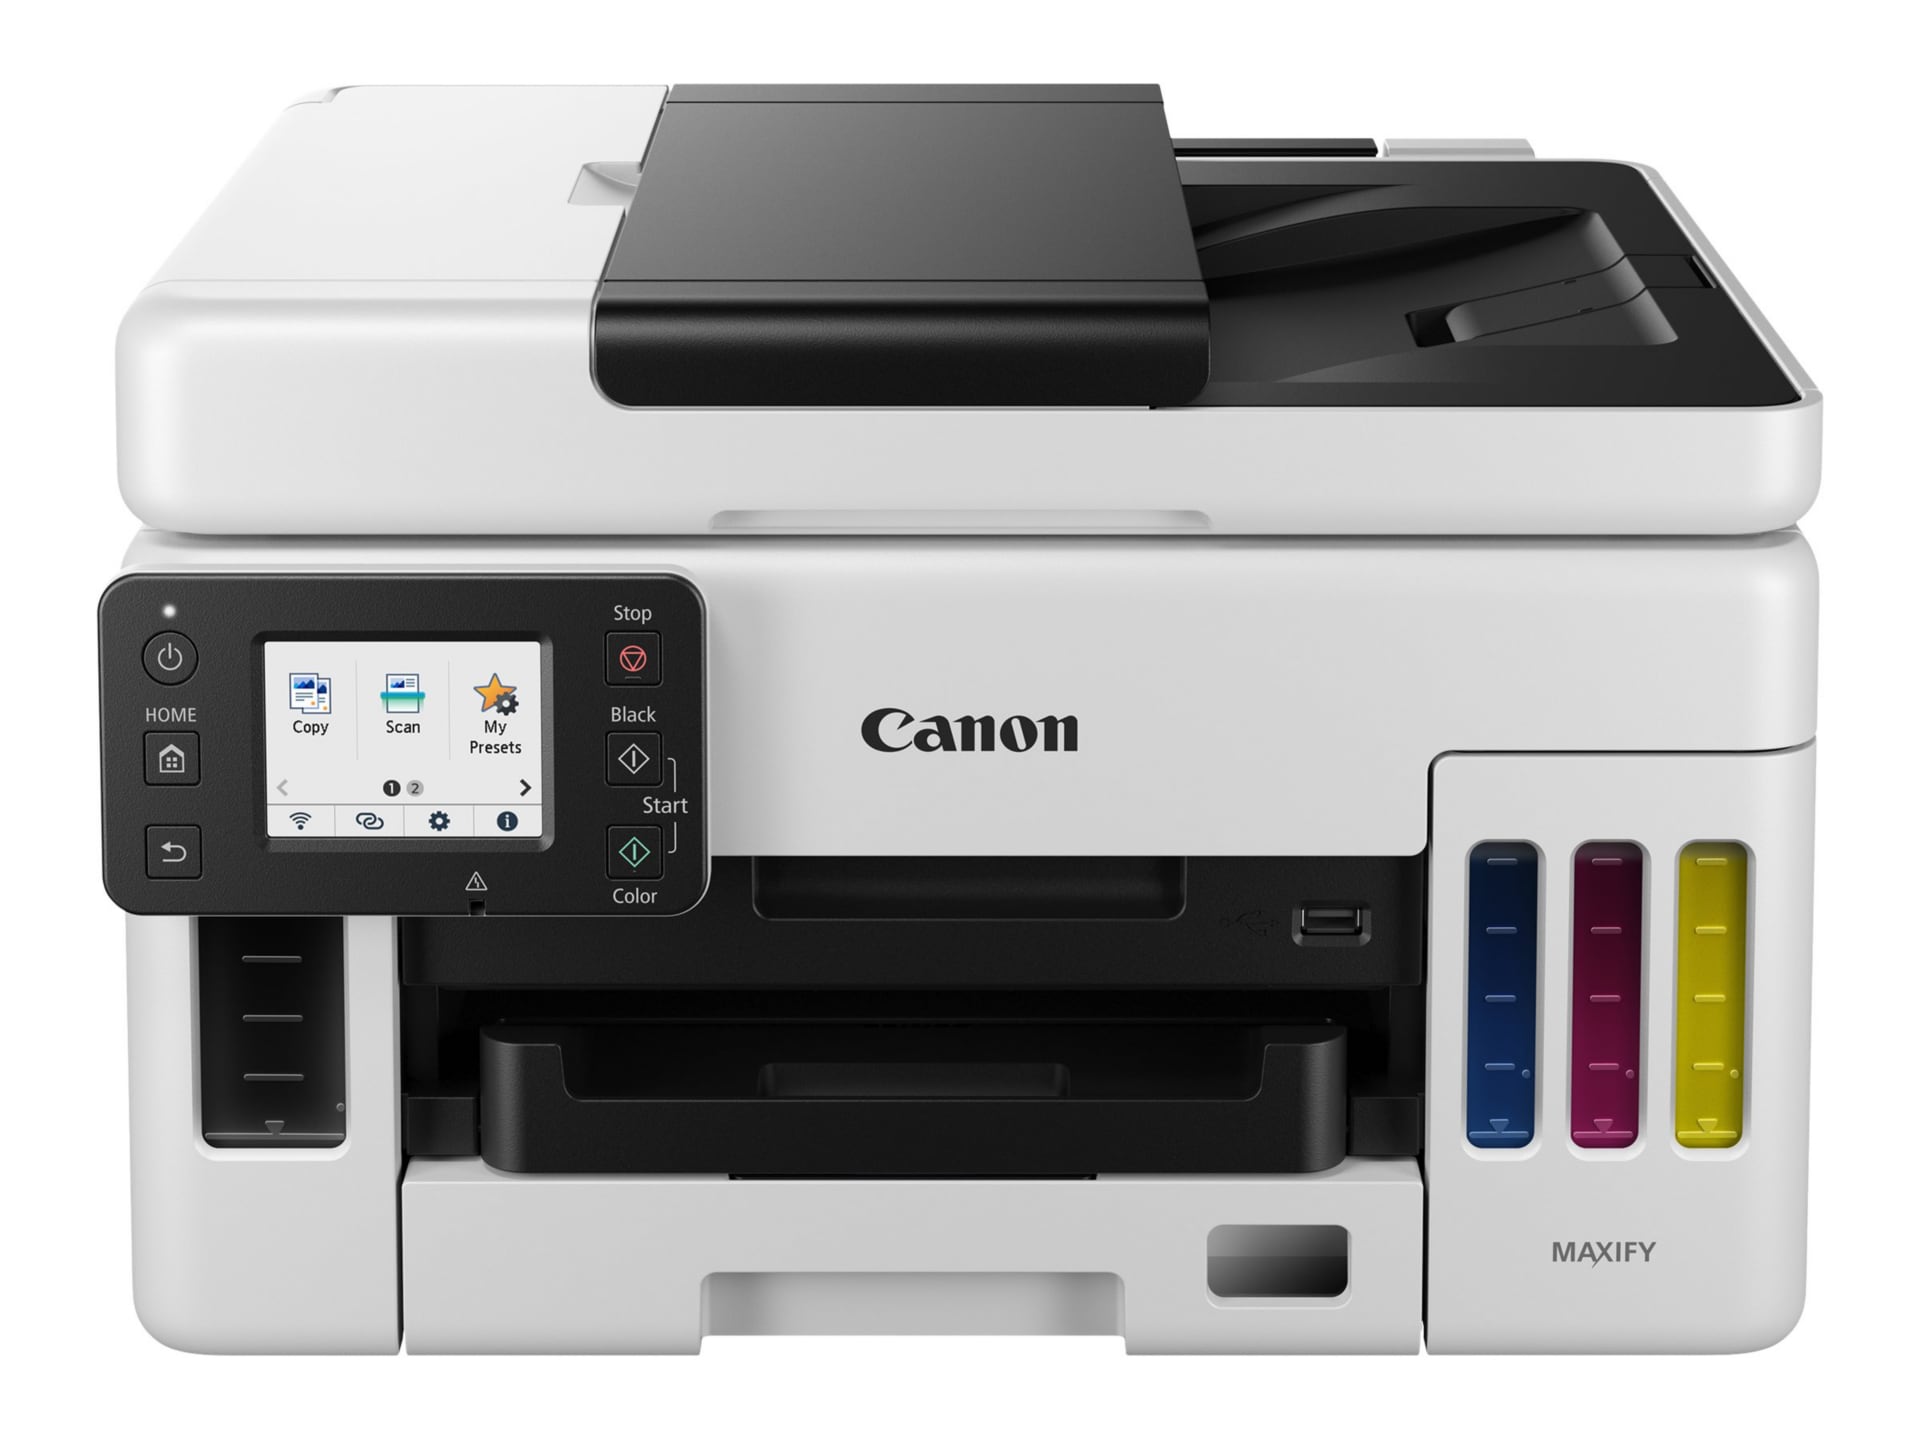 Canon MAXIFY GX6020 - multifunction printer - color - with Canon InstantExchange